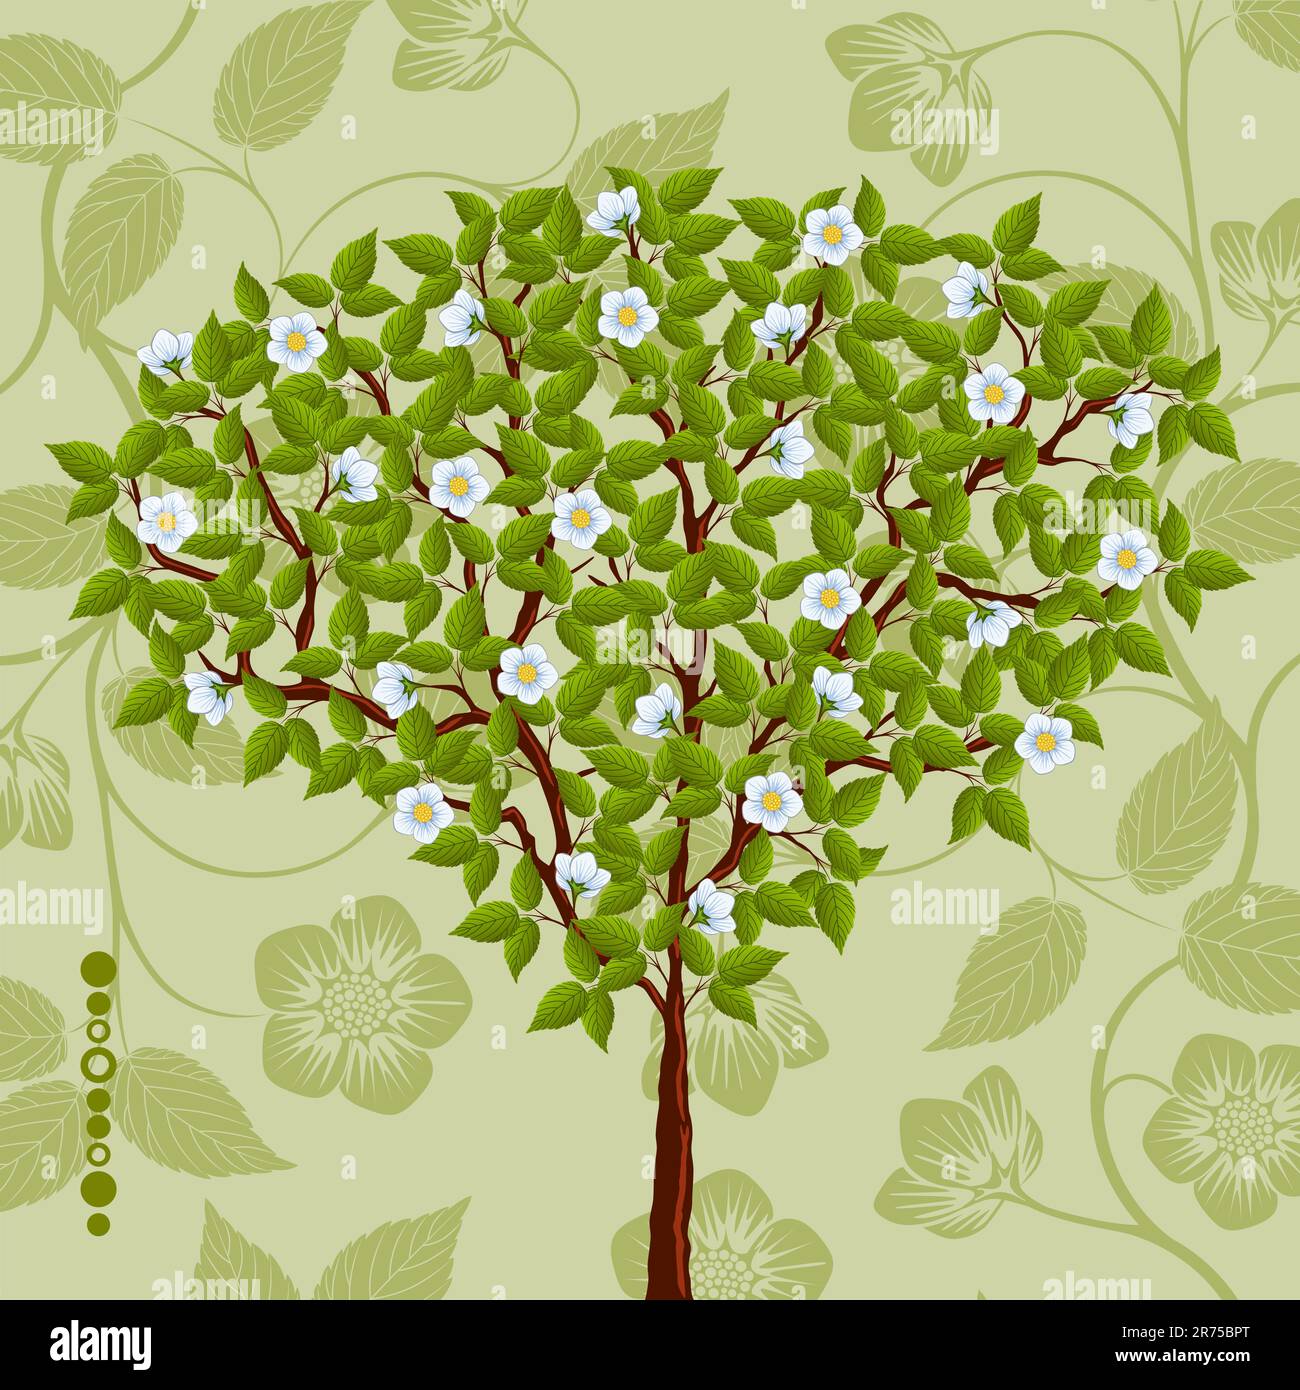 Floral background with a tree. Vector illustration. Stock Vector